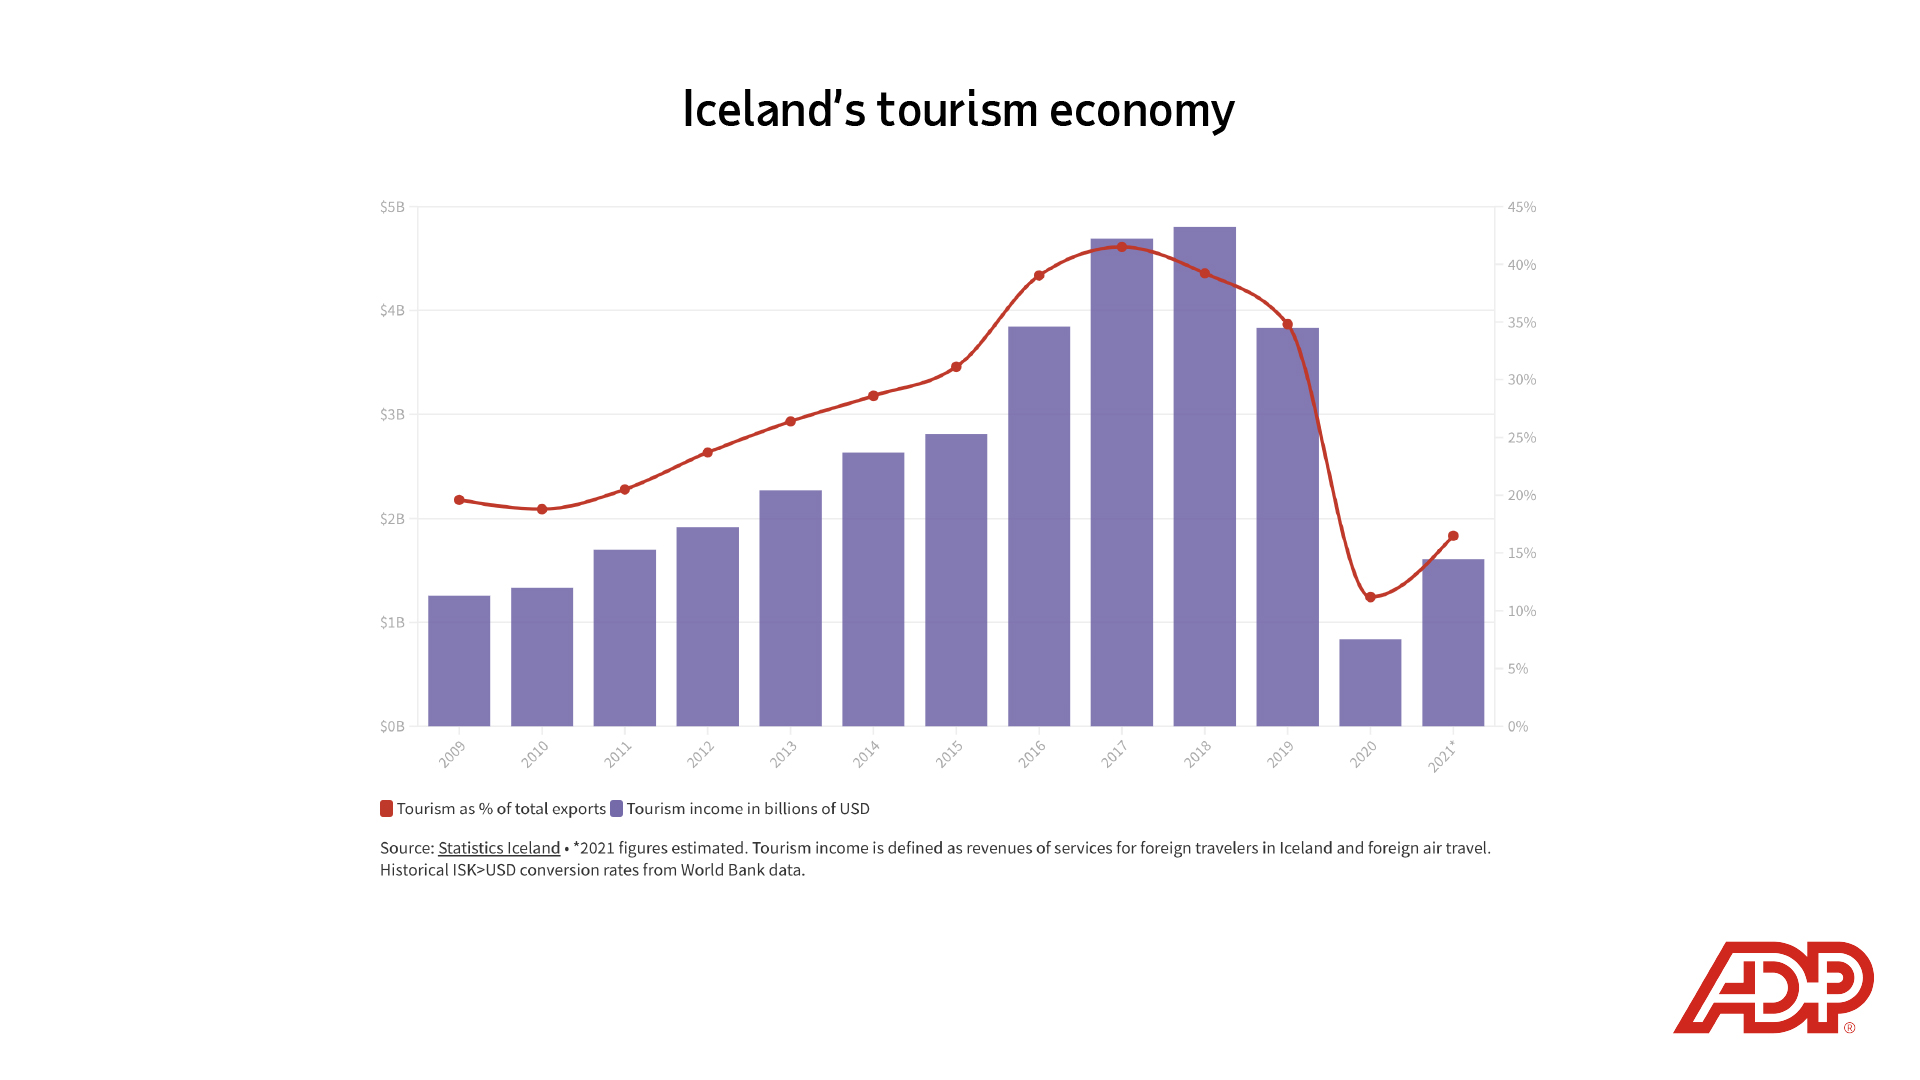 Image description: Chart depicting Iceland's tourism economy between 2009 and 2021, split between tourism as % of total exports and tourism income in billions of USD. End of alt text.